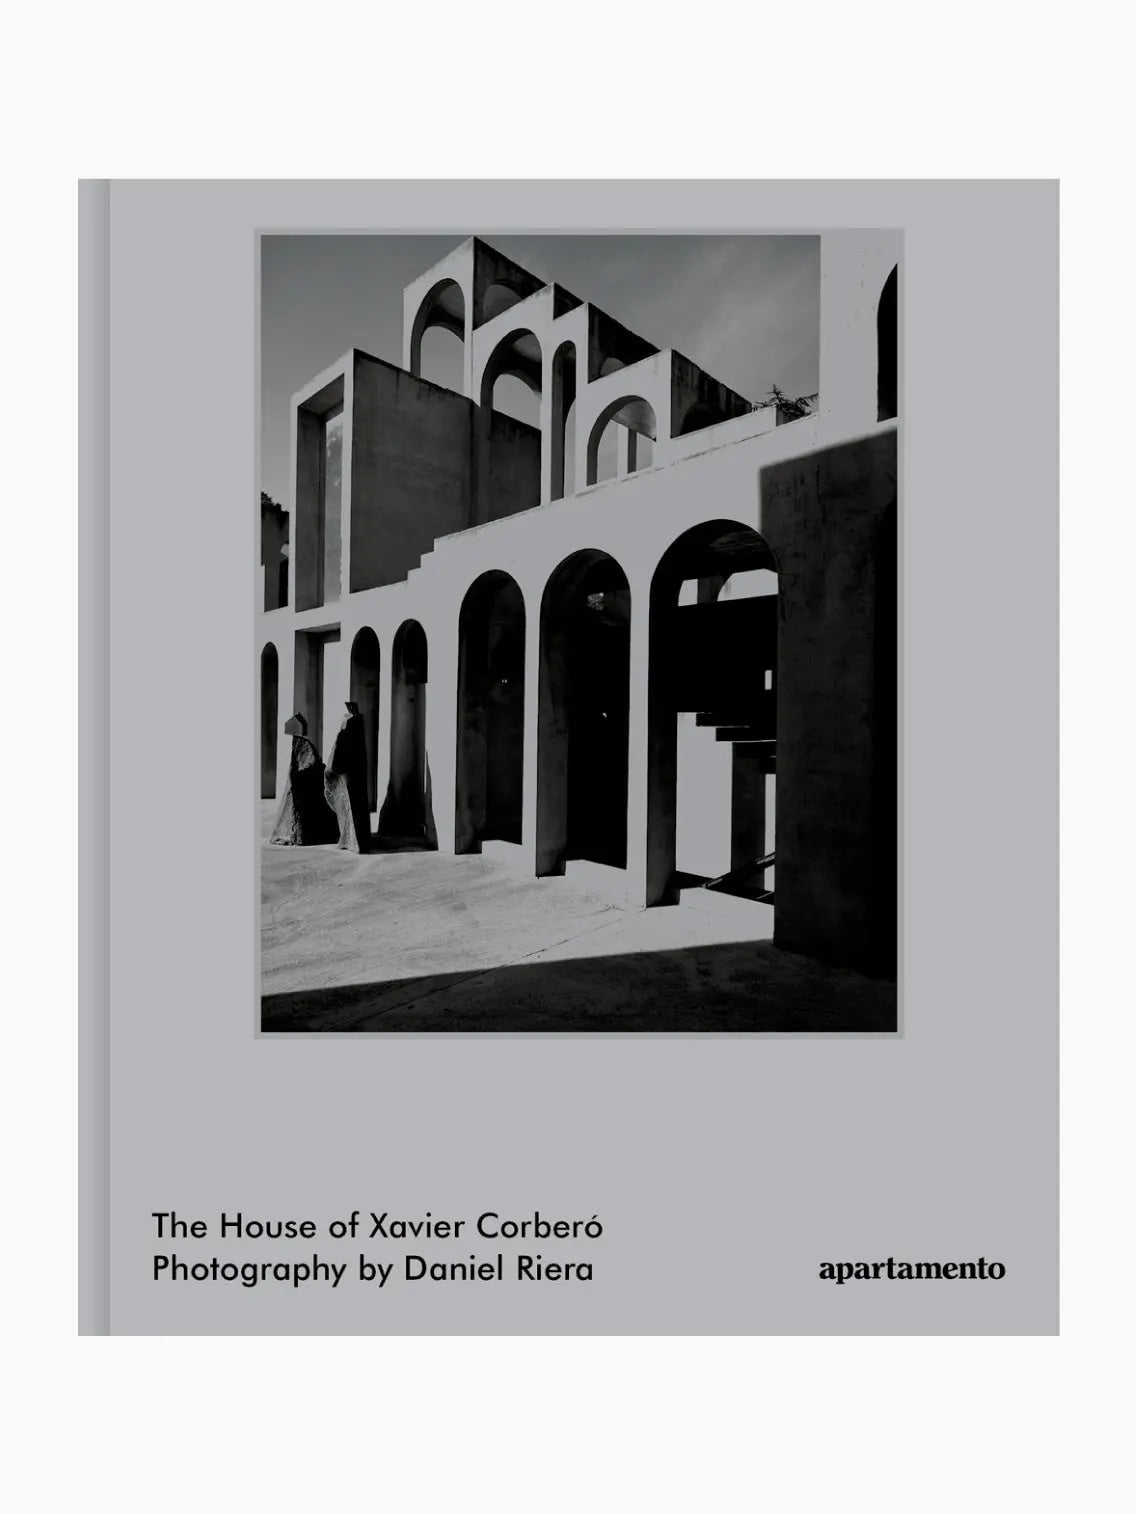 Cover of the book "The House of Xavier Corberó" by Apartamento with photography by Daniel Riera, published by Apartamento. The cover features a black and white photo of a building with arches and shadows in Barcelona. A person stands near one of the arches in the background. Available at bassalstore.